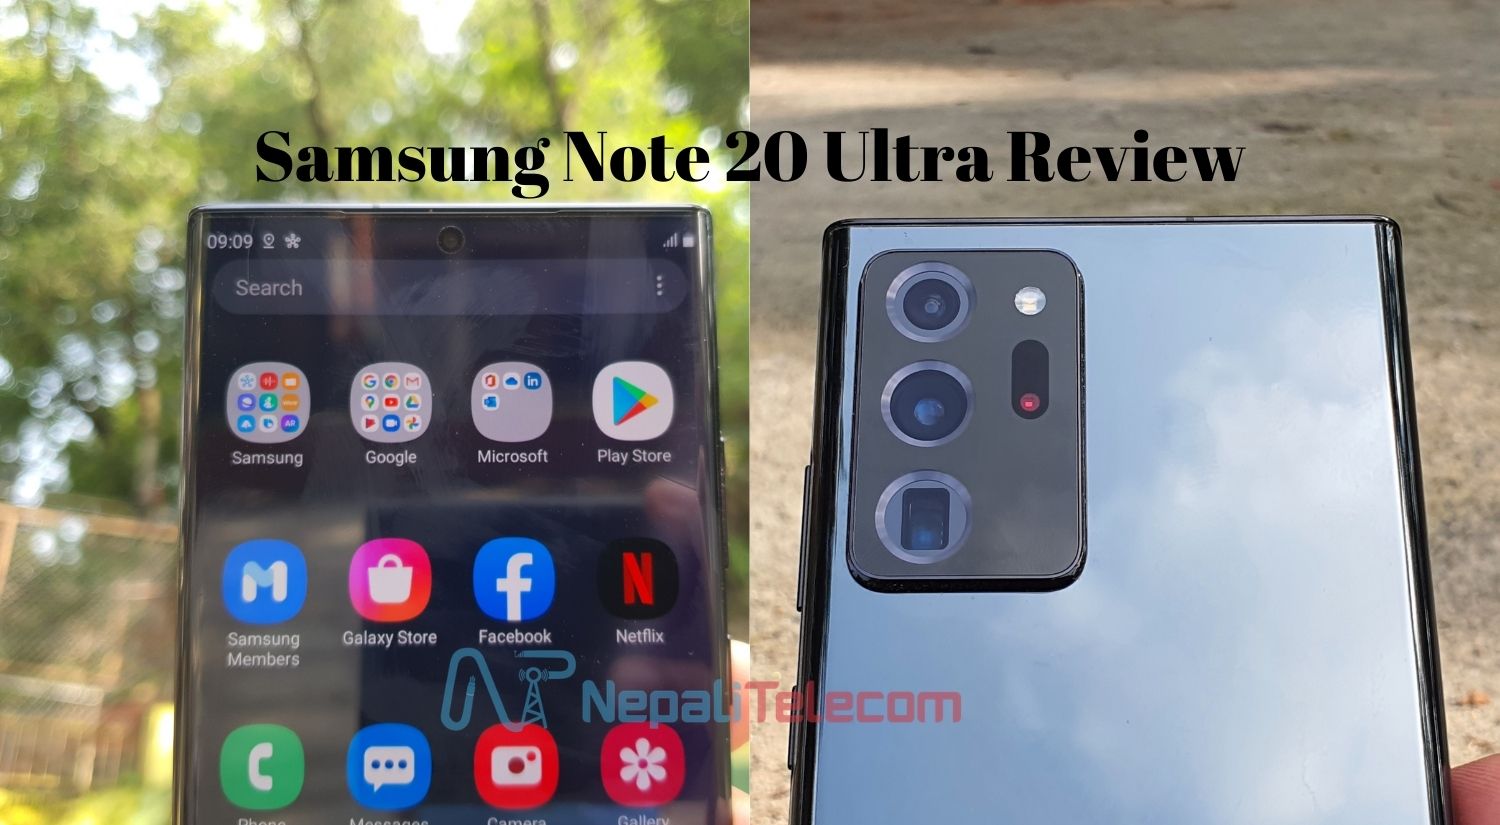 Samsung Note 20 Ultra review